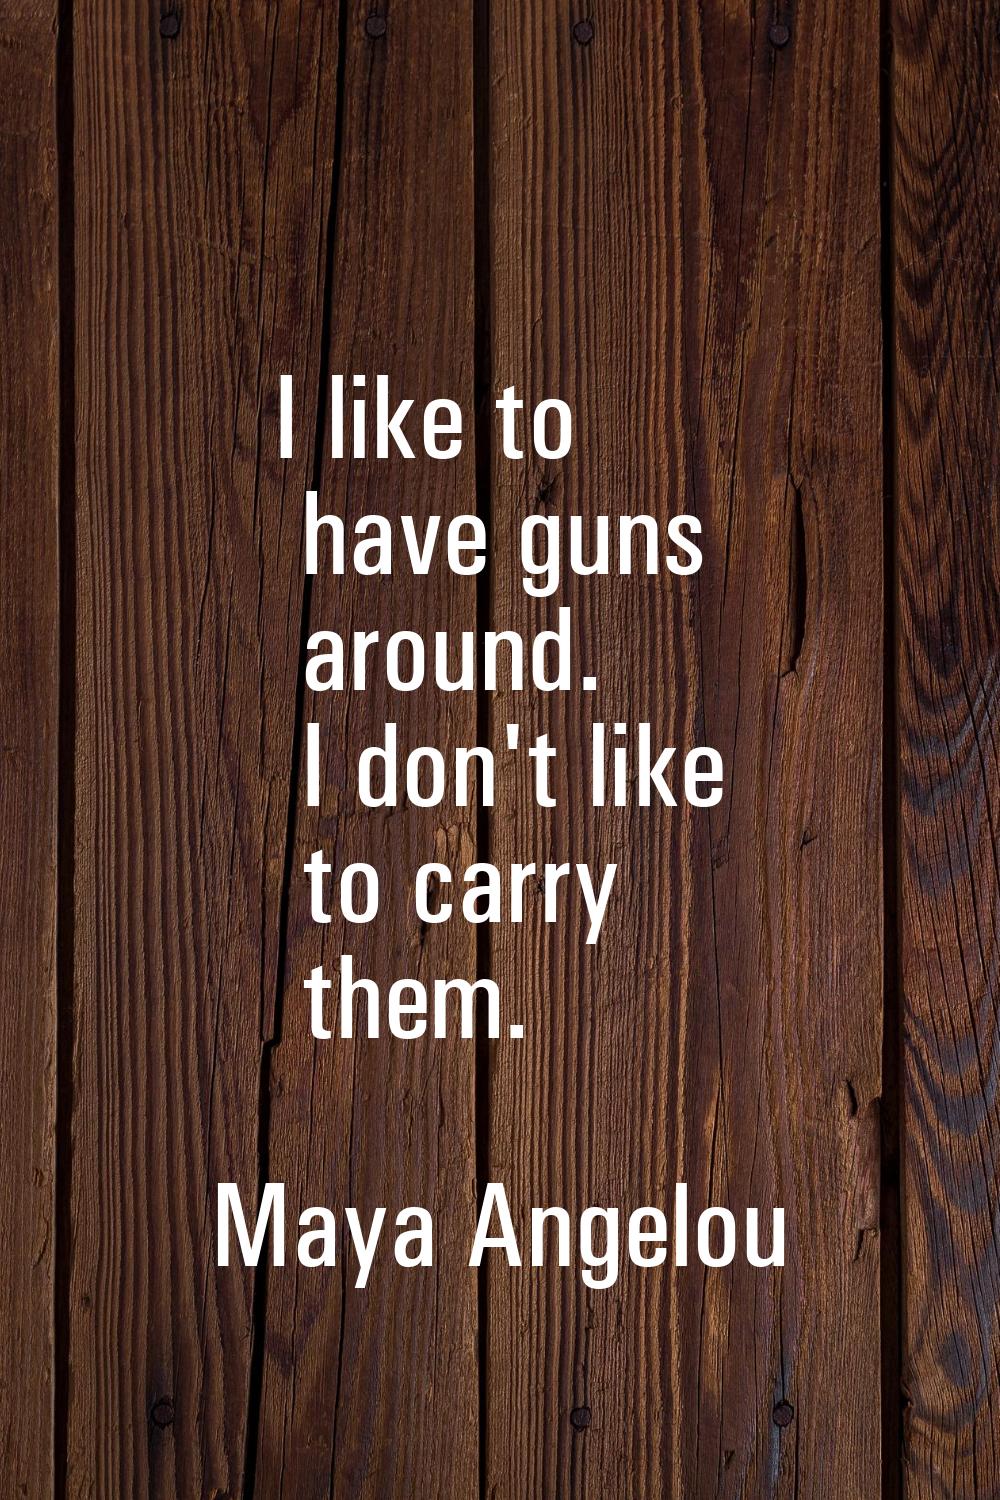 I like to have guns around. I don't like to carry them.